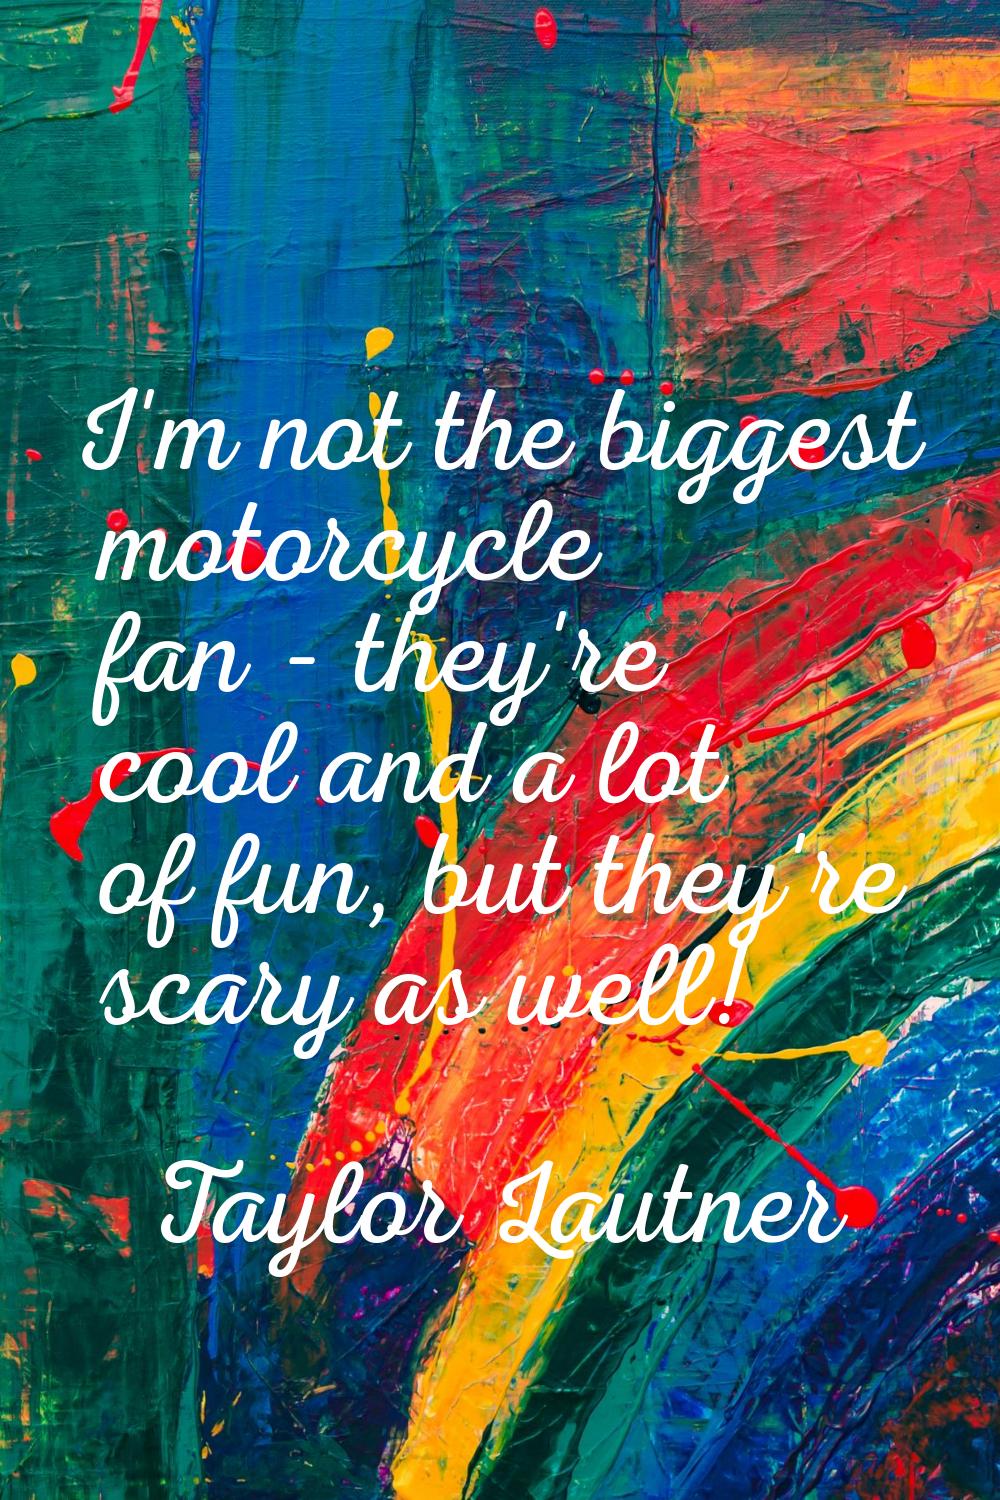 I'm not the biggest motorcycle fan - they're cool and a lot of fun, but they're scary as well!